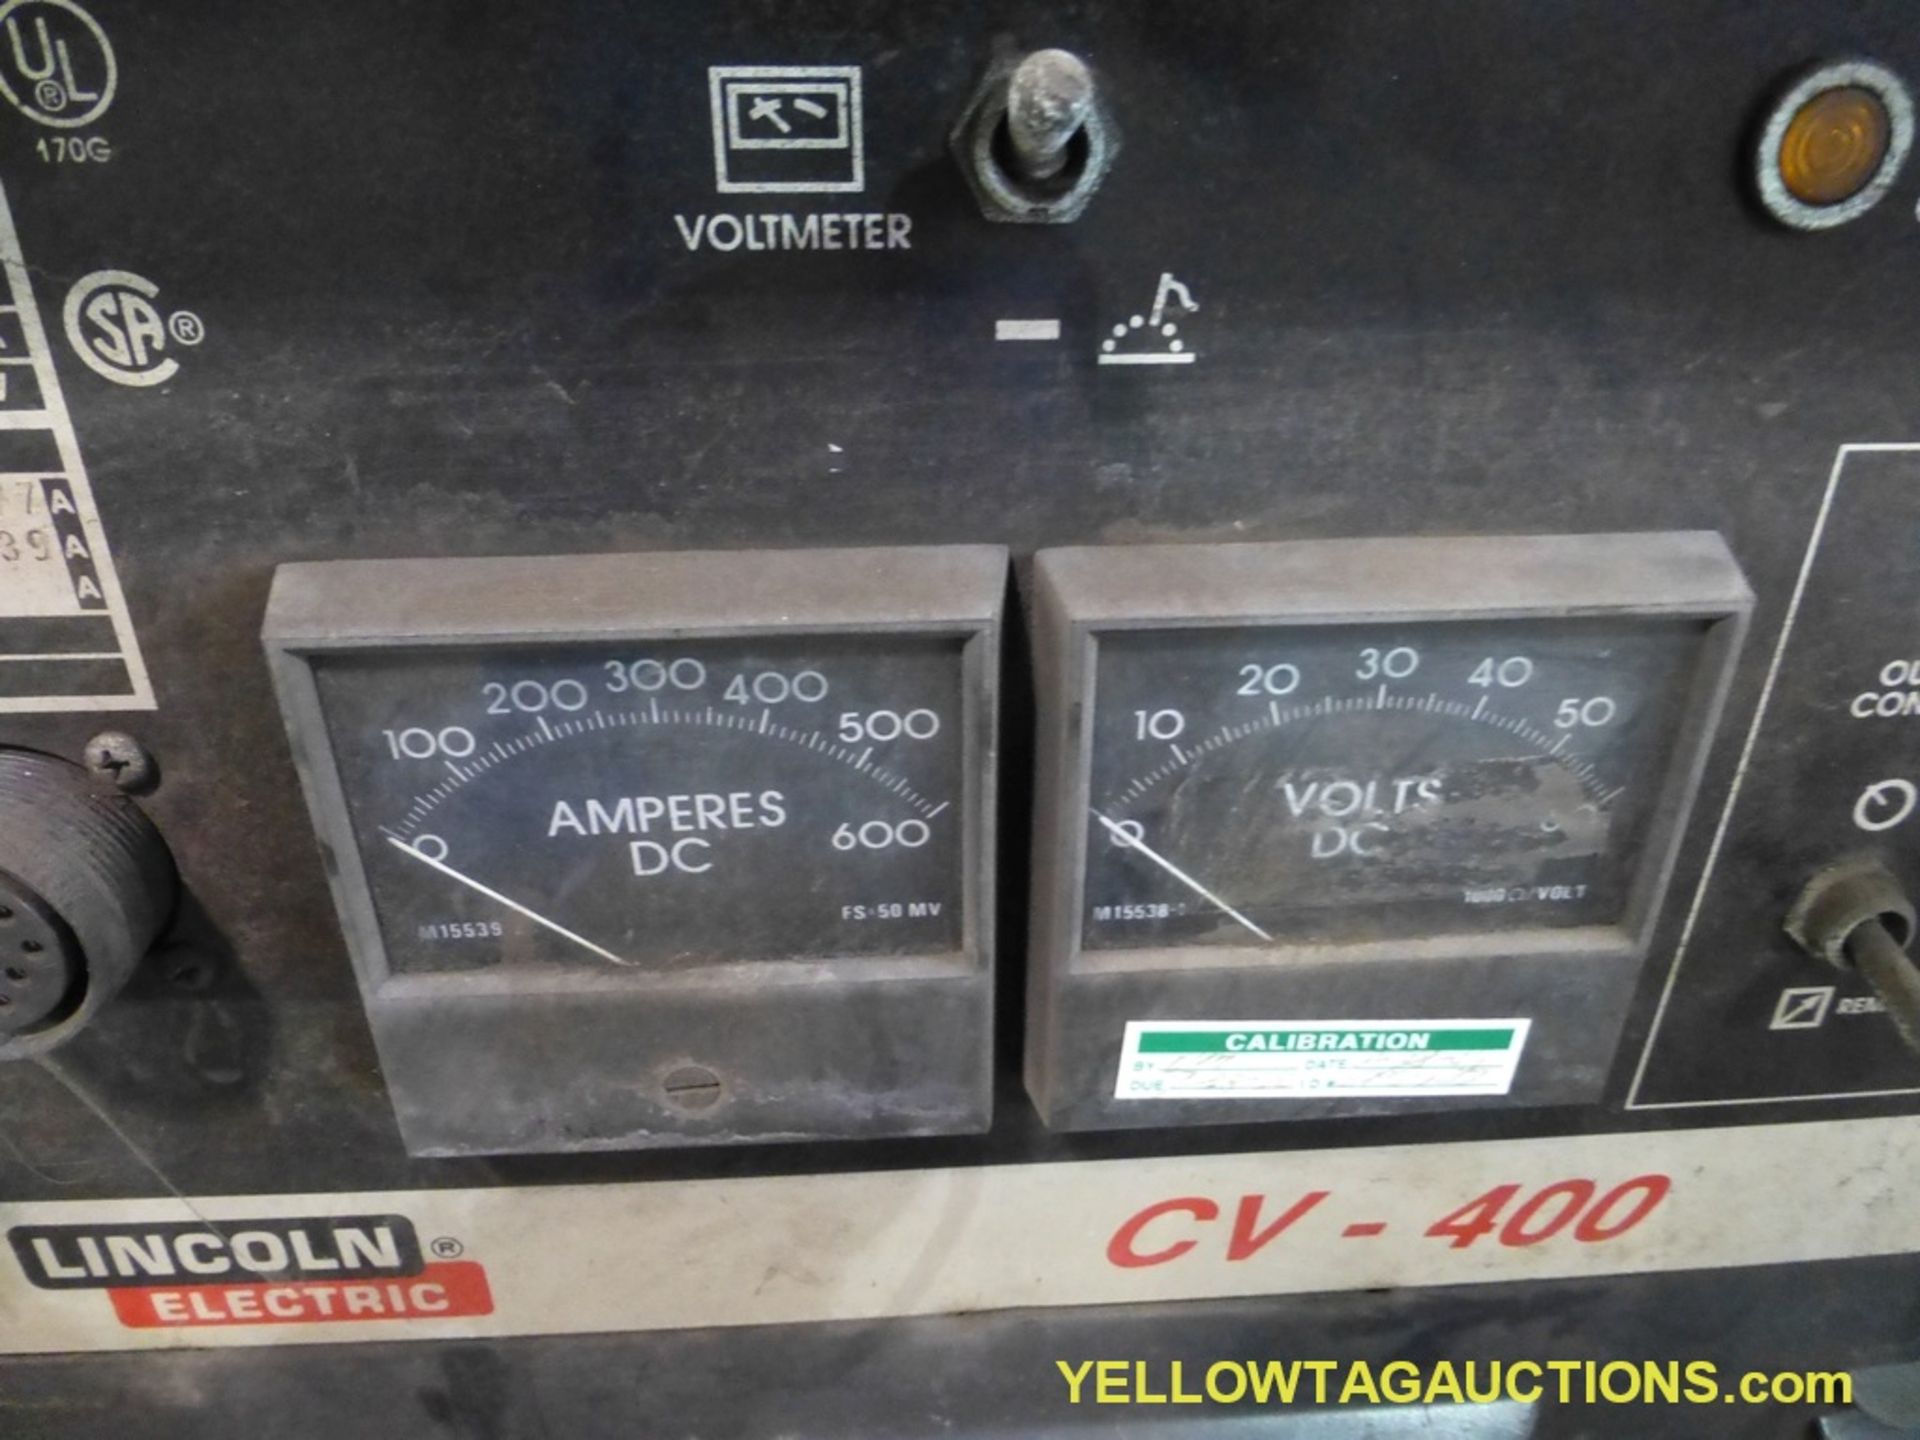 Lot of (2) Lincoln Electric CV-400 Welder | Model No. CV-400; Code: 10084M; 60A at 12V to 500A at 42 - Image 4 of 8